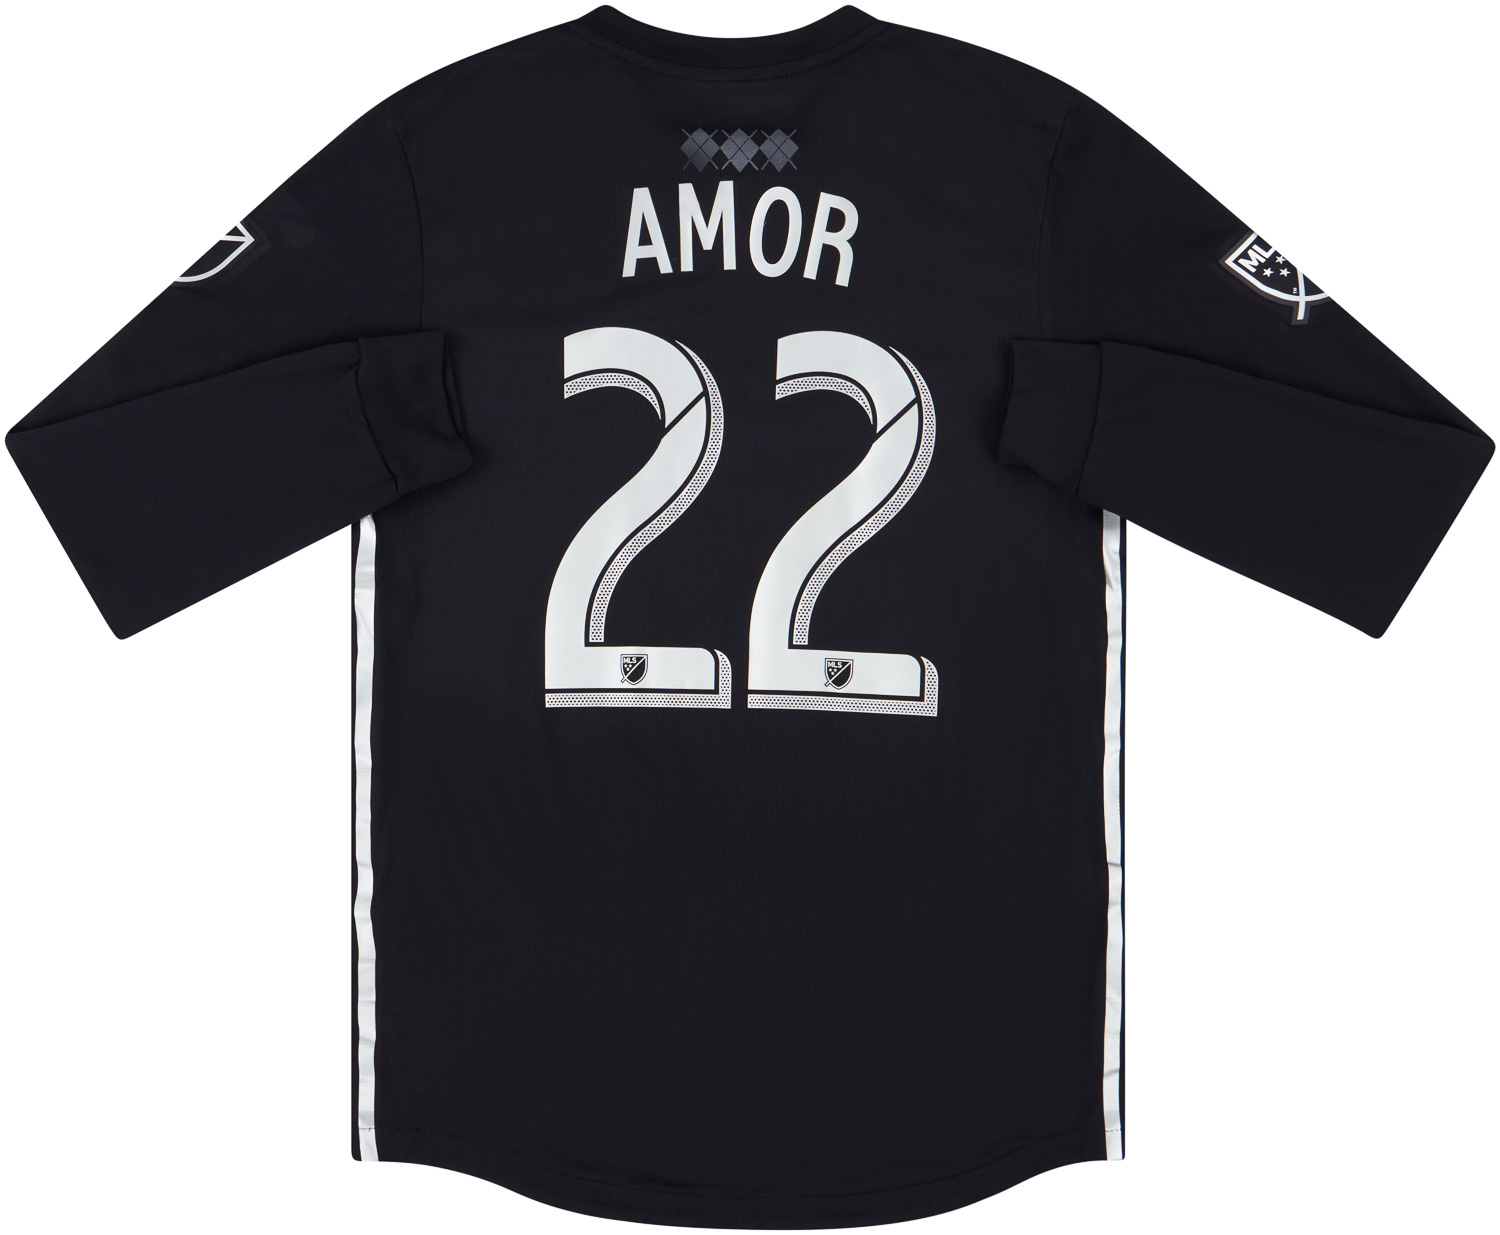 2018 Sporting Kansas City Player Issue Authentic Away Shirt Amor #22